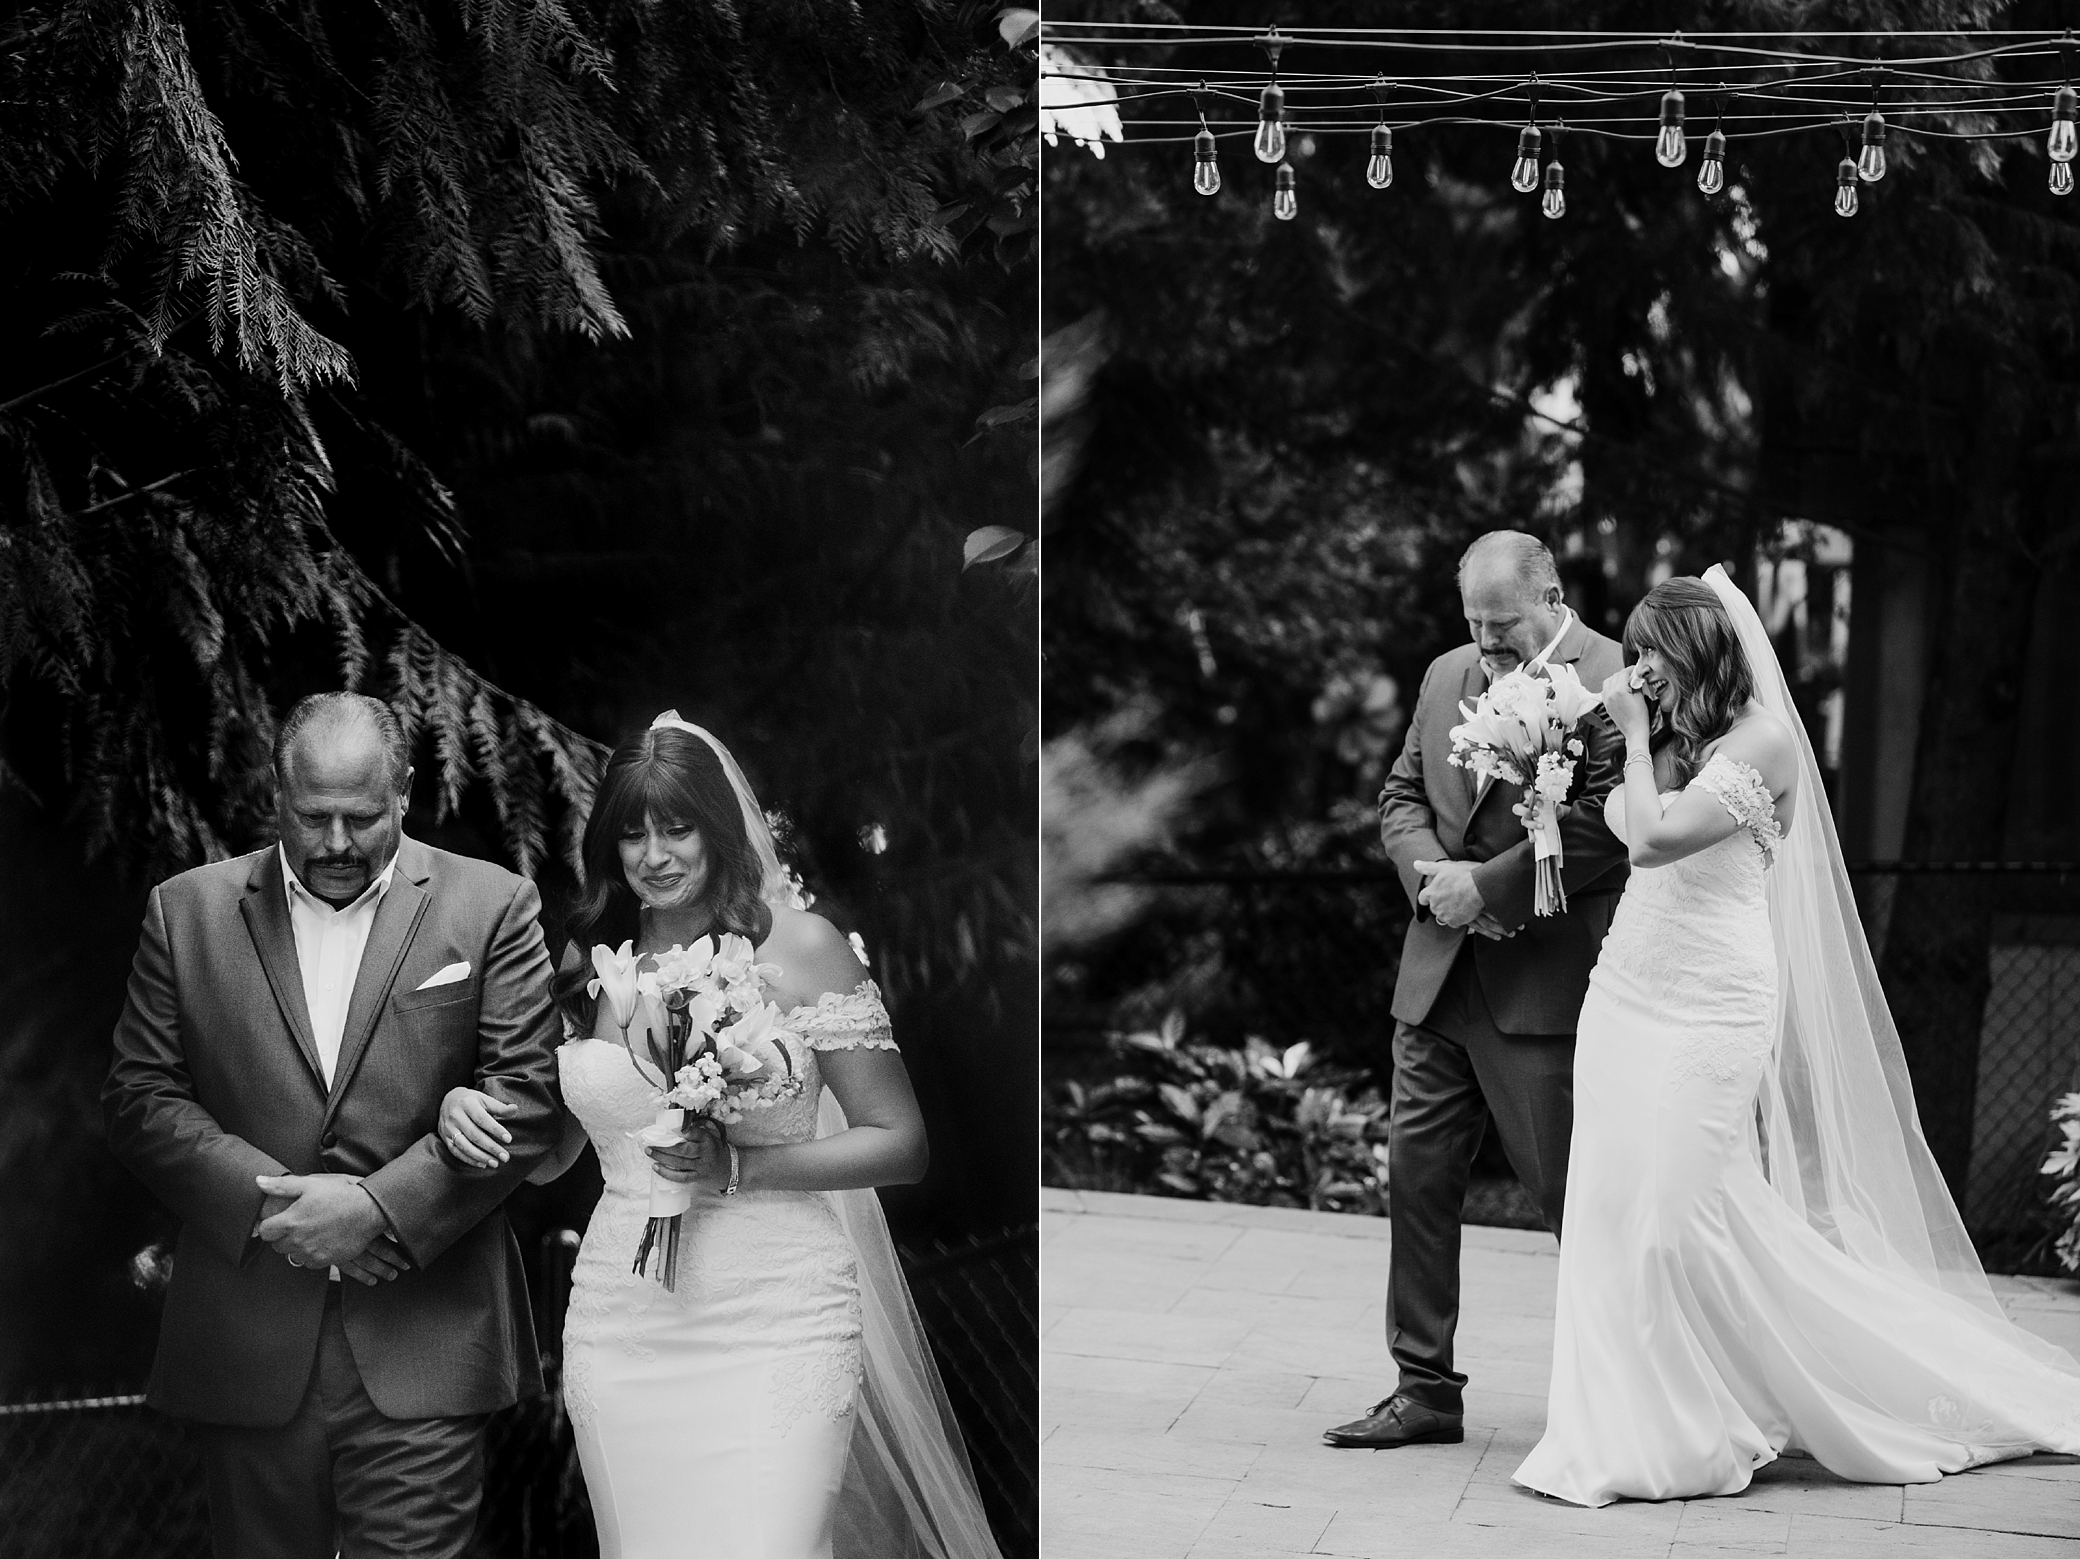 Bride walking down the aisle at intimate backyard wedding in Tacoma, WA. Photographed by intimate wedding photographer, Megan Montalvo Photography. 